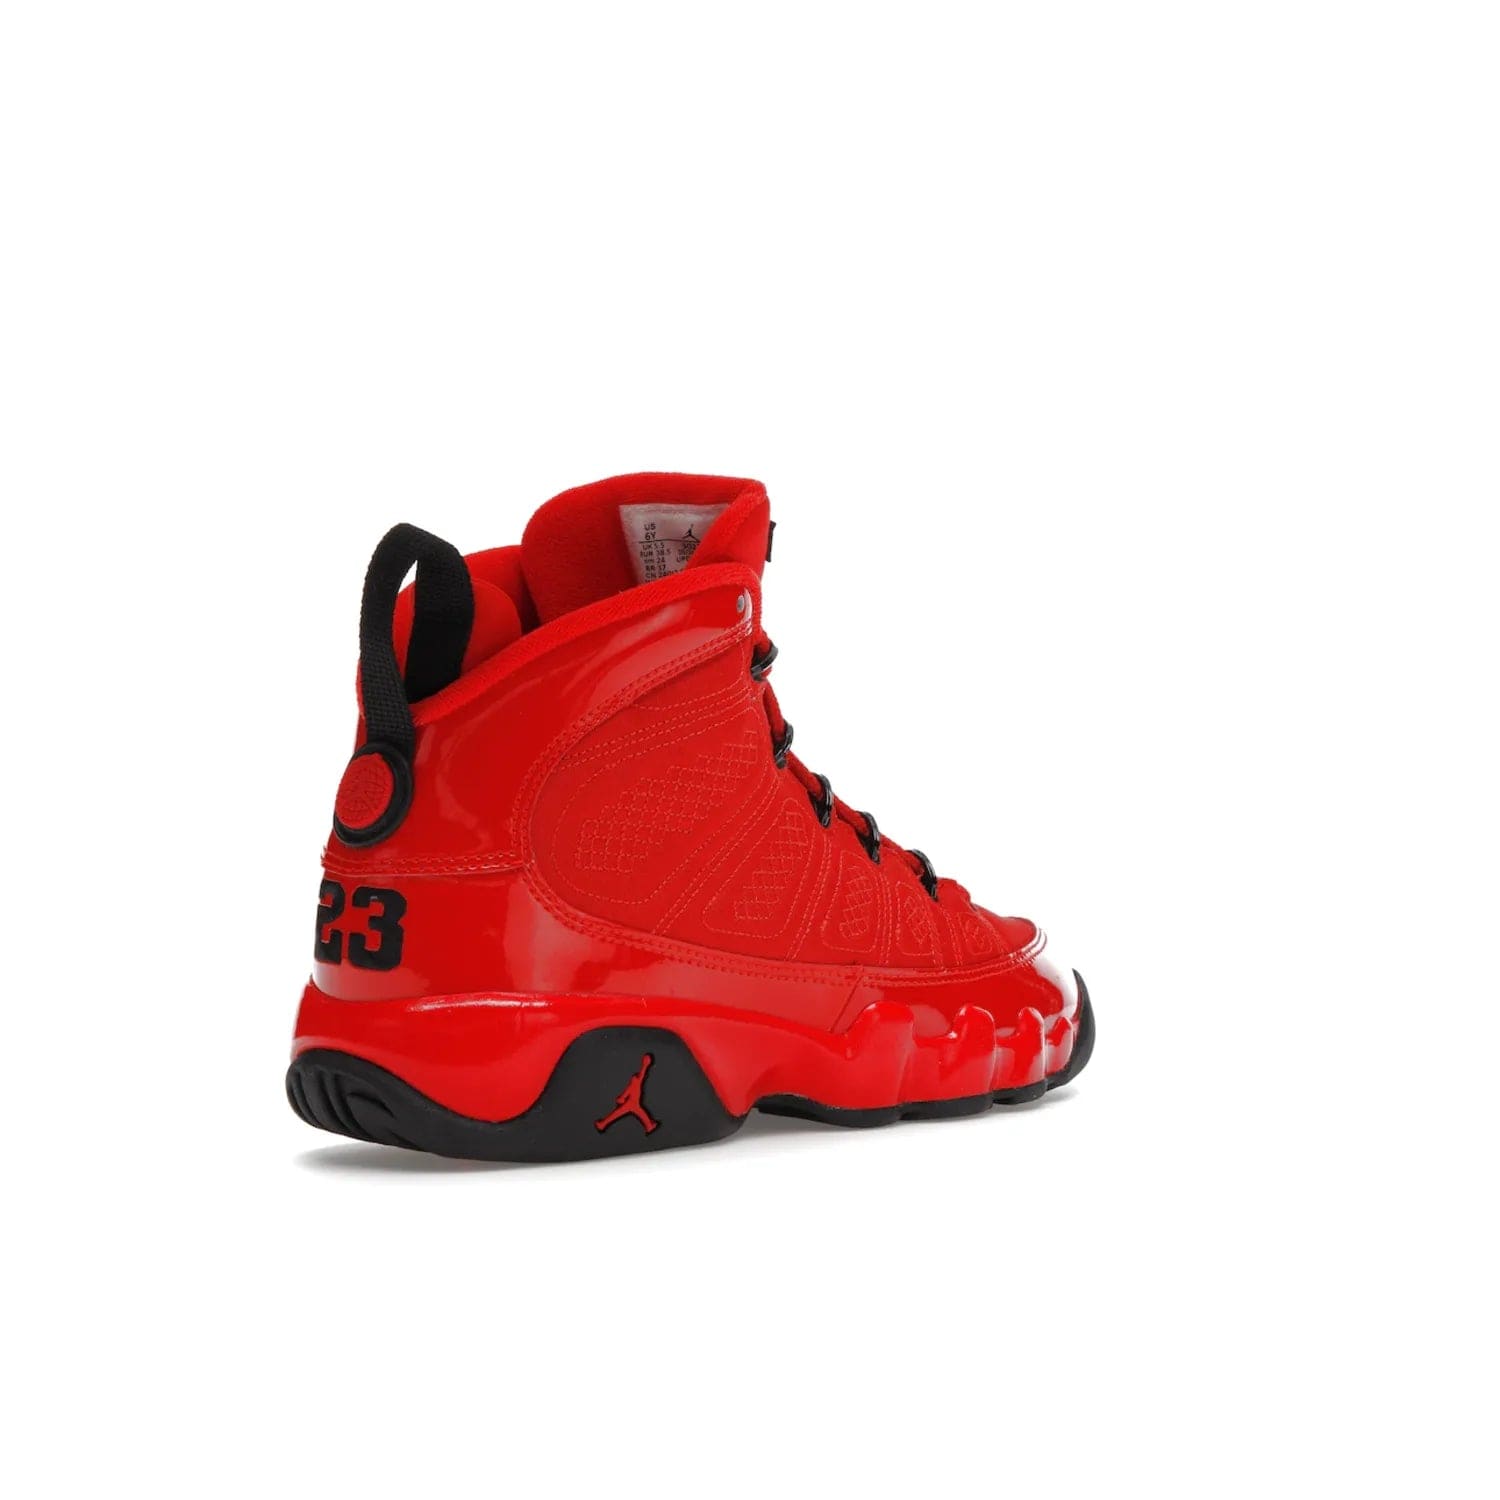 Jordan 9 Retro Chile Red (GS) - Image 32 - Only at www.BallersClubKickz.com - Introducing the Air Jordan 9 Retro Chile Red (GS), a vintage 1993 silhouette with fiery colorway. Features quilted side paneling, glossy patent leather, pull tabs, black contrast accents, and foam midsole. Launching May 2022 for $140.